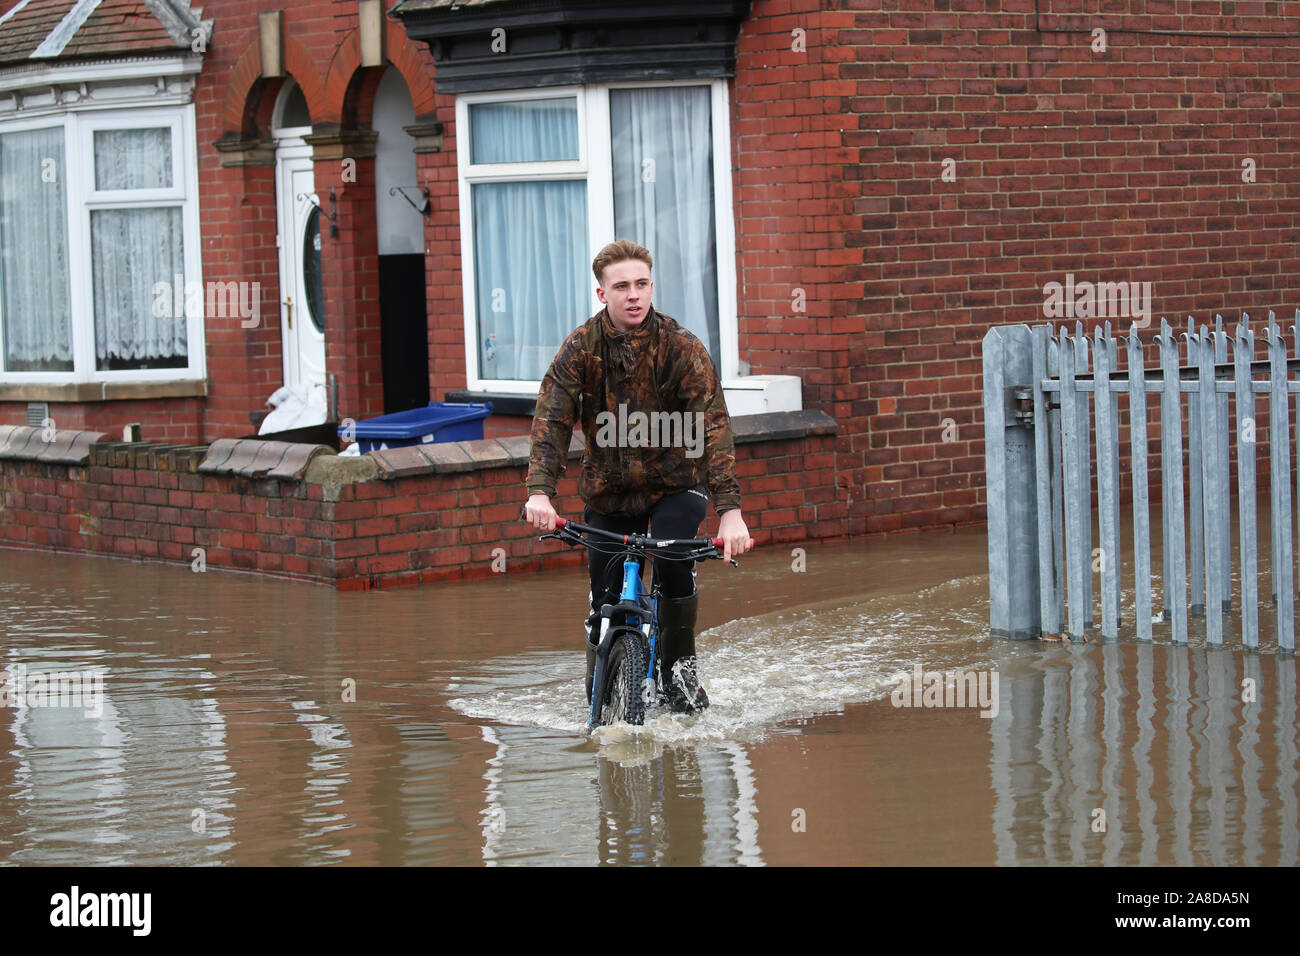 A teenager rides his bike through floodwater in Doncaster, Yorkshire, as parts of England endured a month's worth of rain in 24 hours, with scores of people rescued or forced to evacuate their homes, others stranded overnight in a shopping centre, and travel plans thrown into chaos. Stock Photo